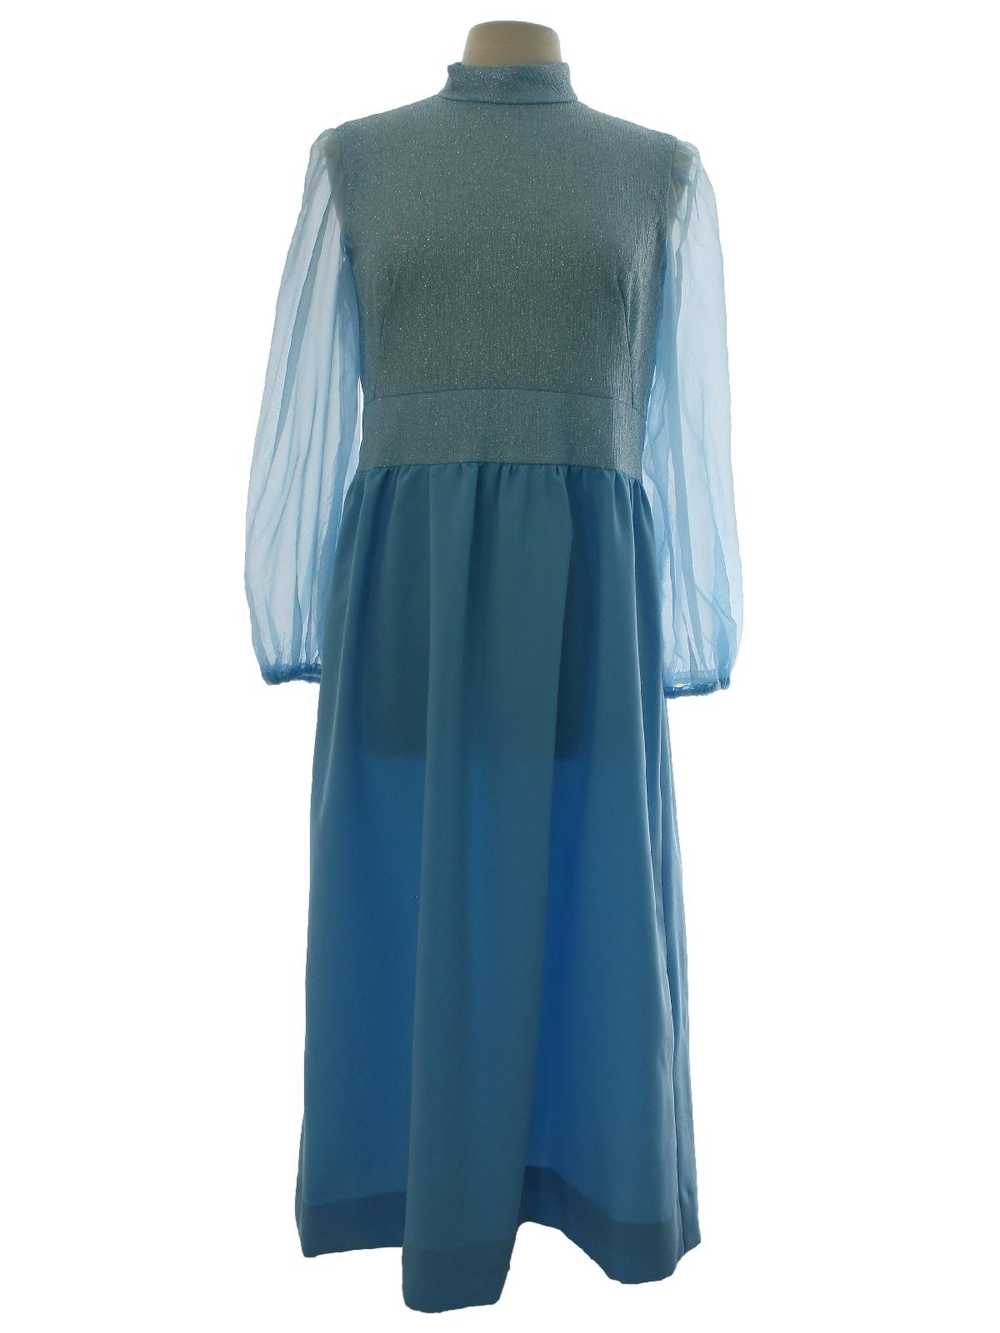 1970's Mod Prom or Cocktail Maxi Dress - image 1